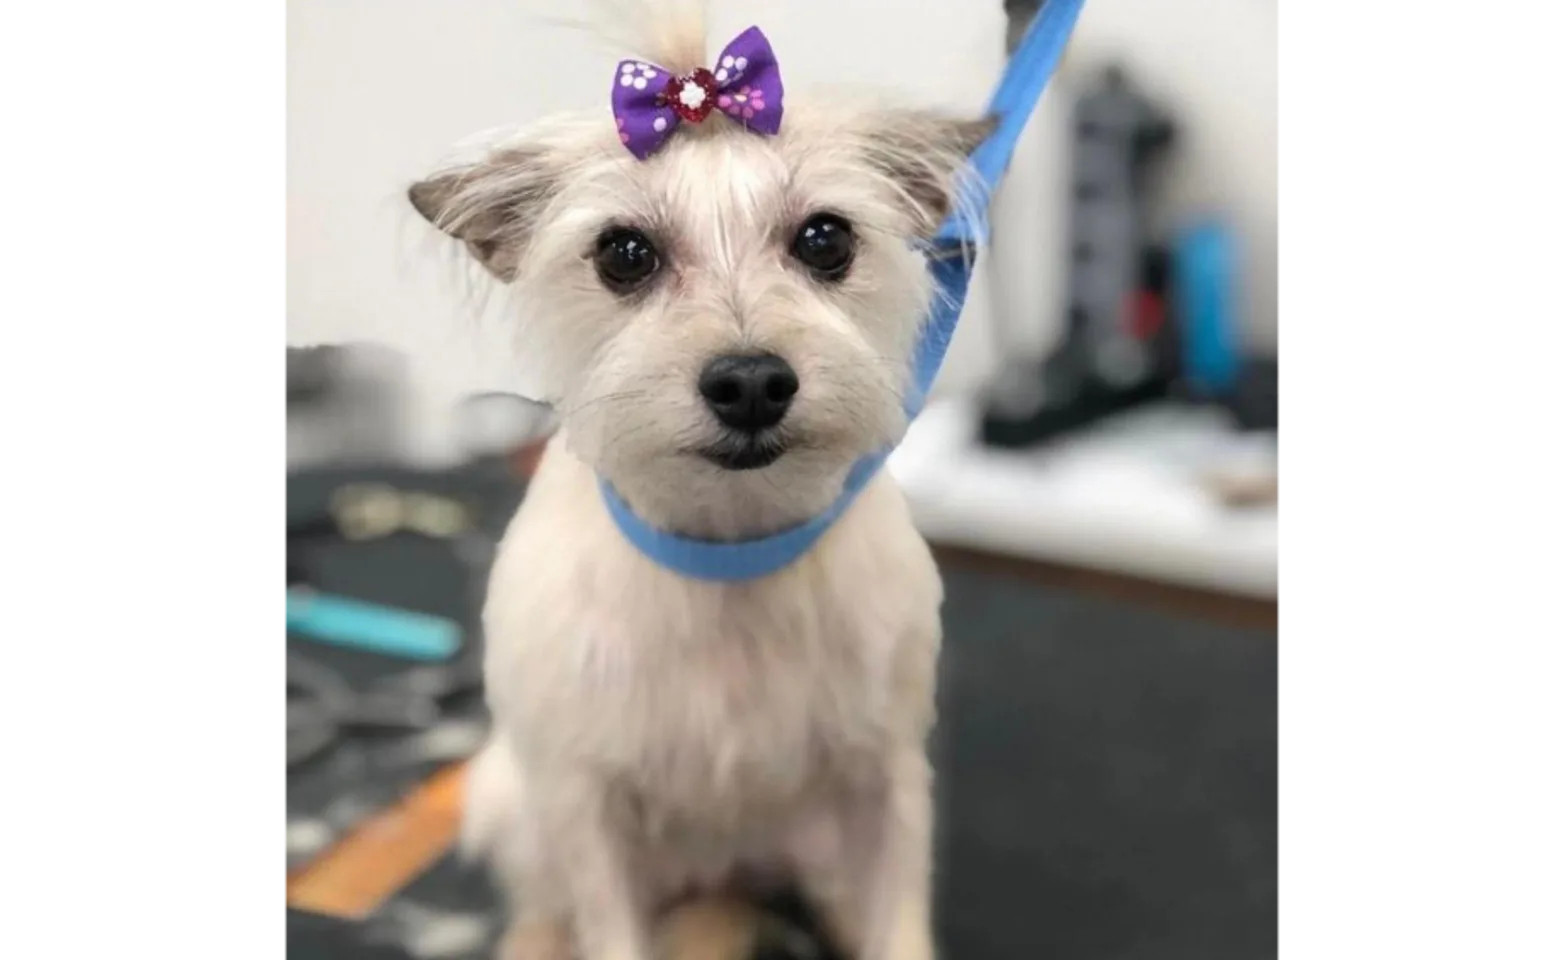 White dog with sparkly purple bow and blue leash